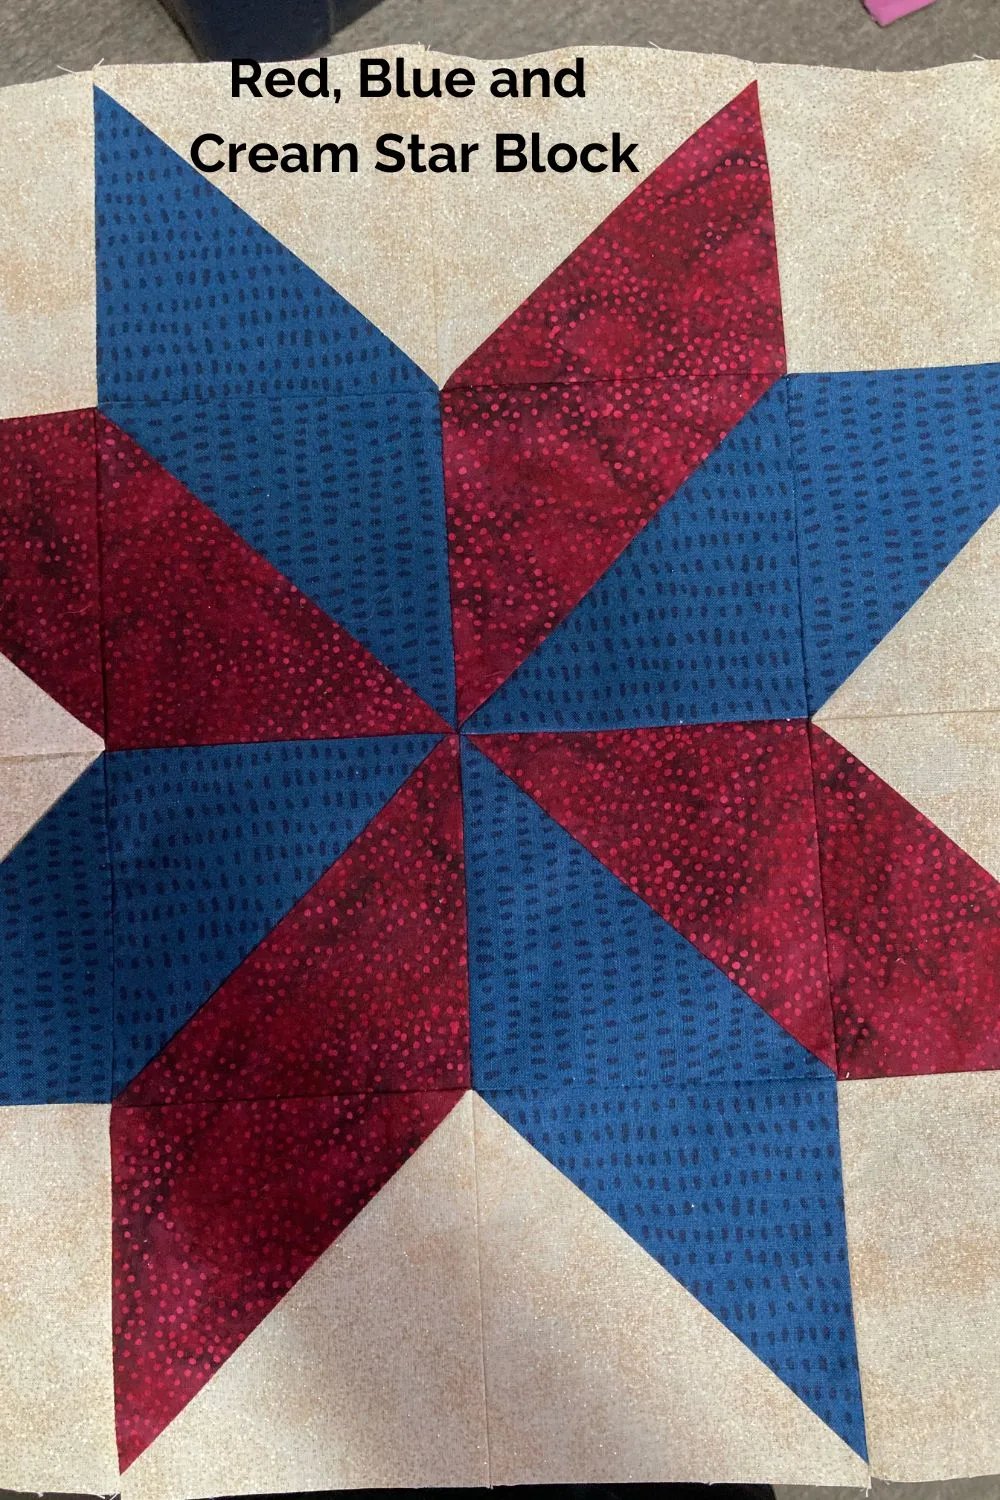 Red, Blue and Cream Star Block